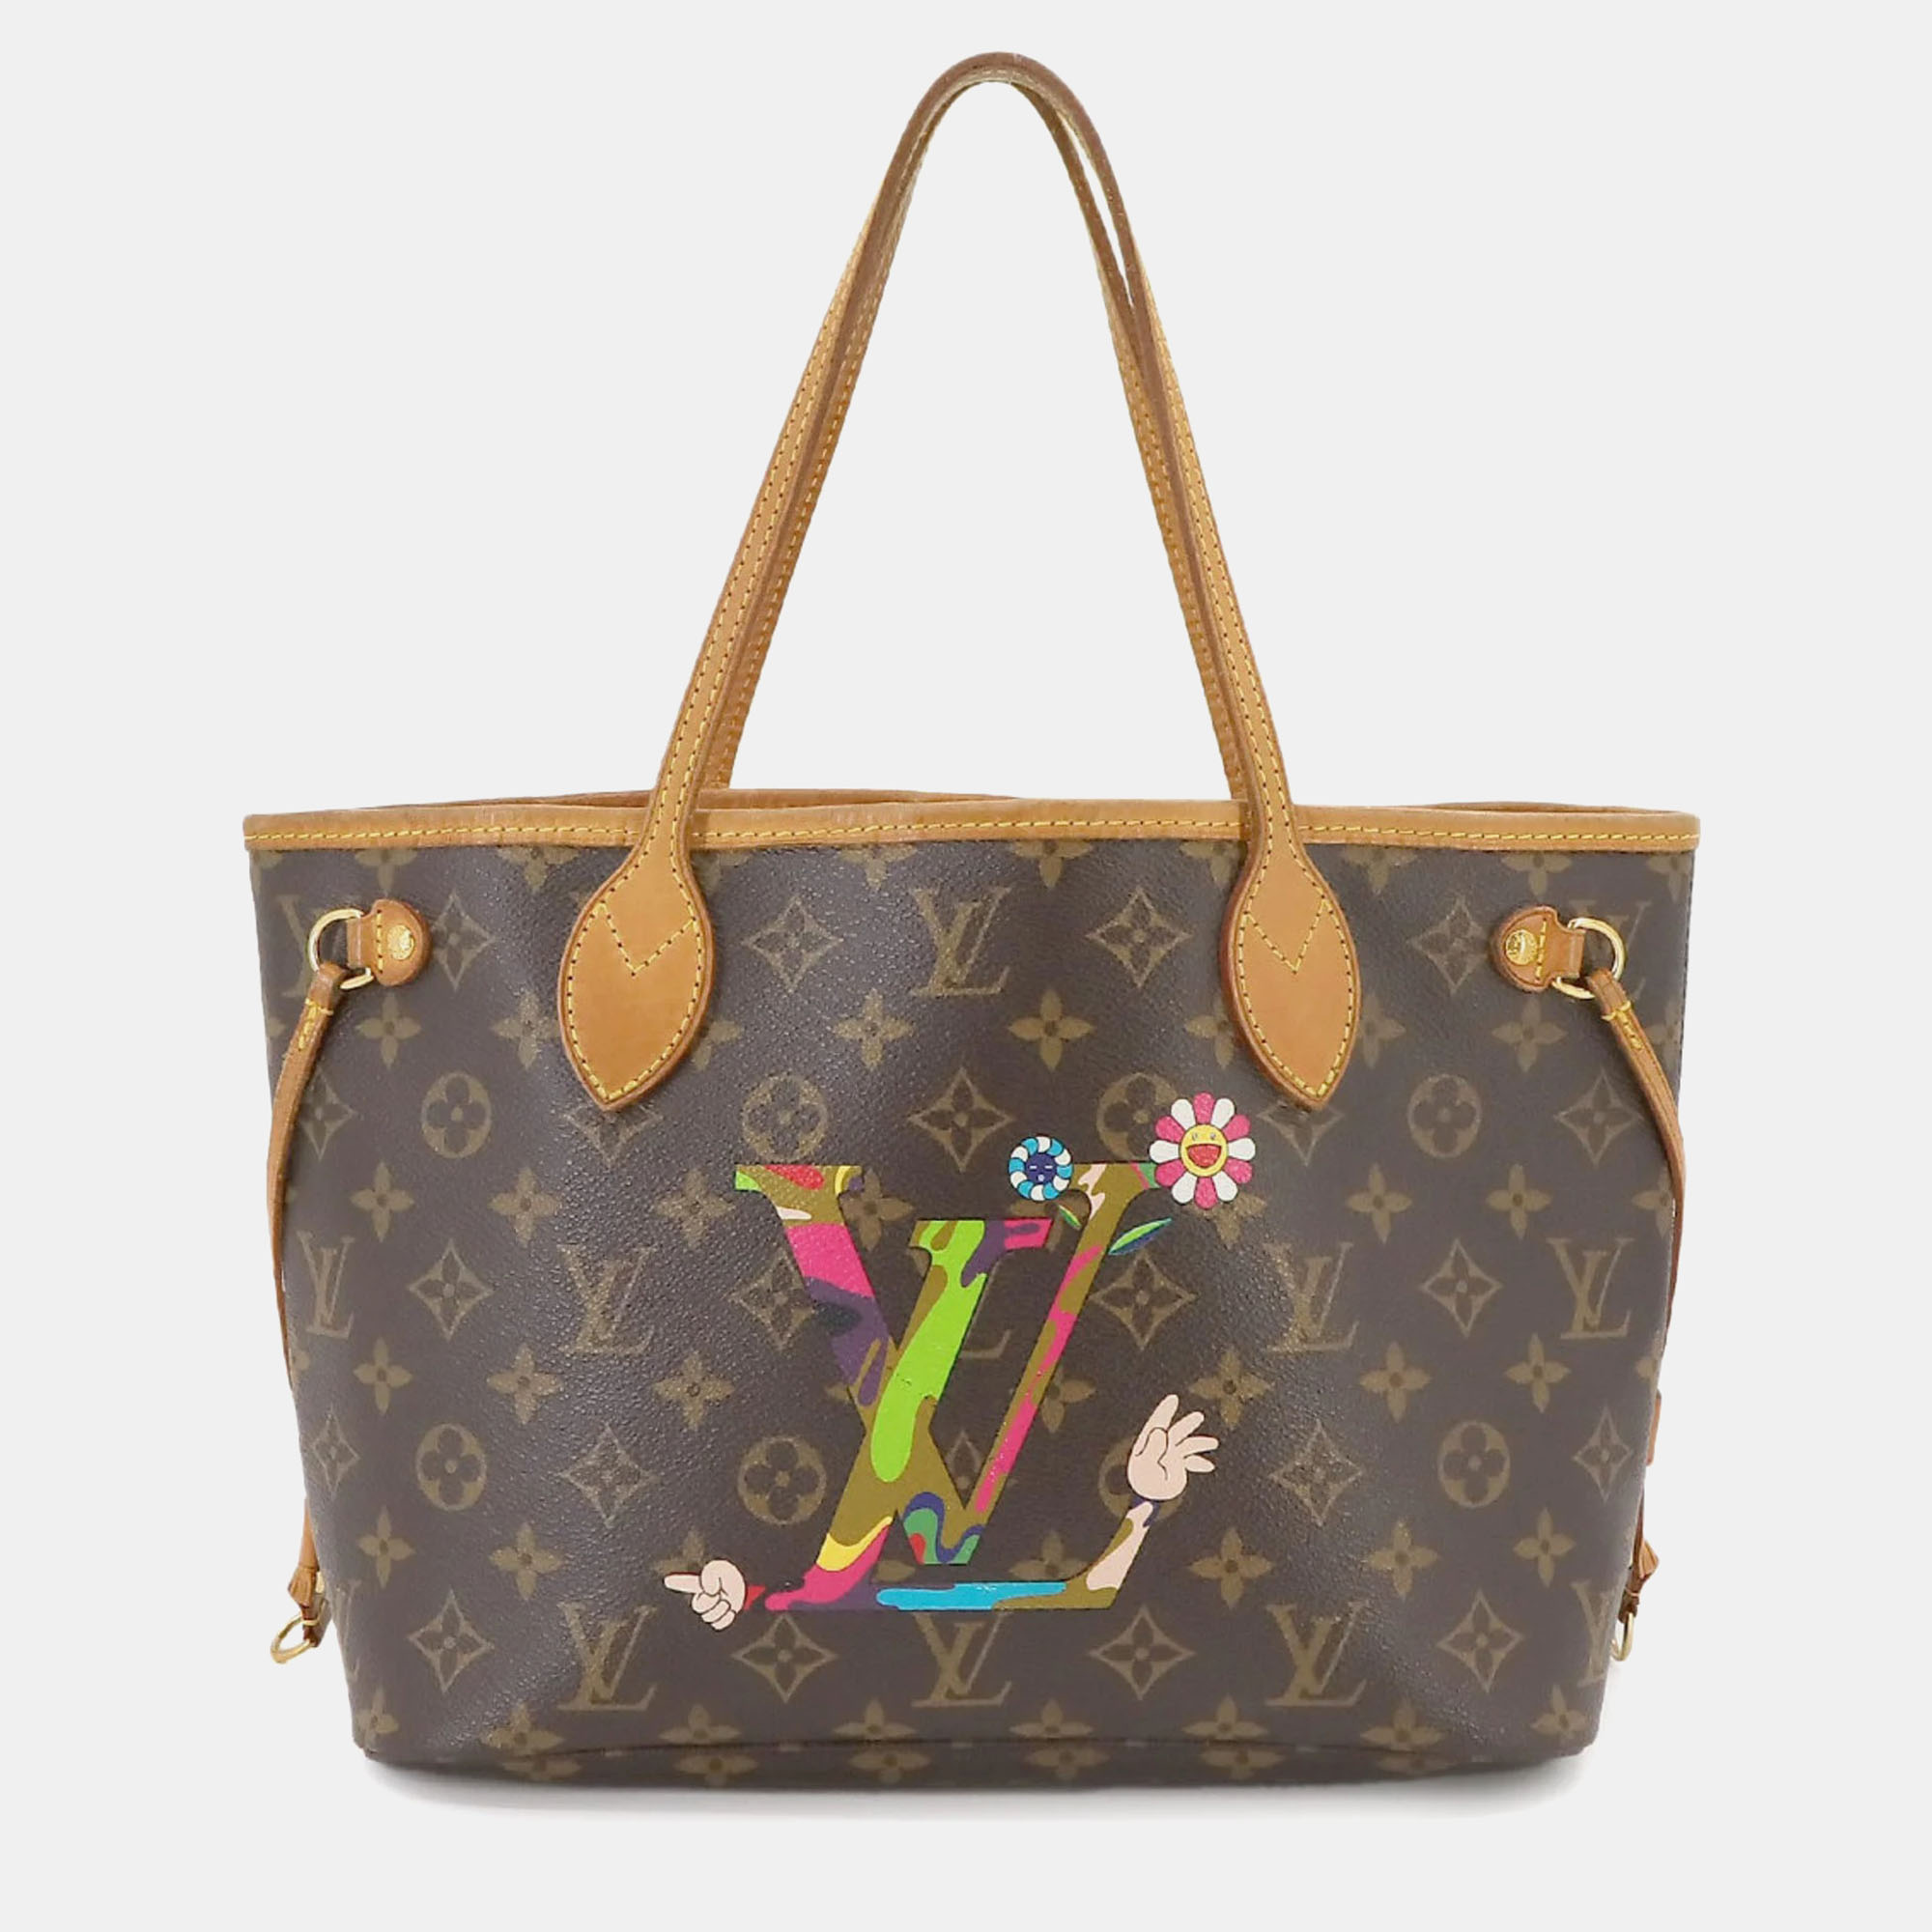 Louis vuitton brown canvas pm printed neverfull tote bag